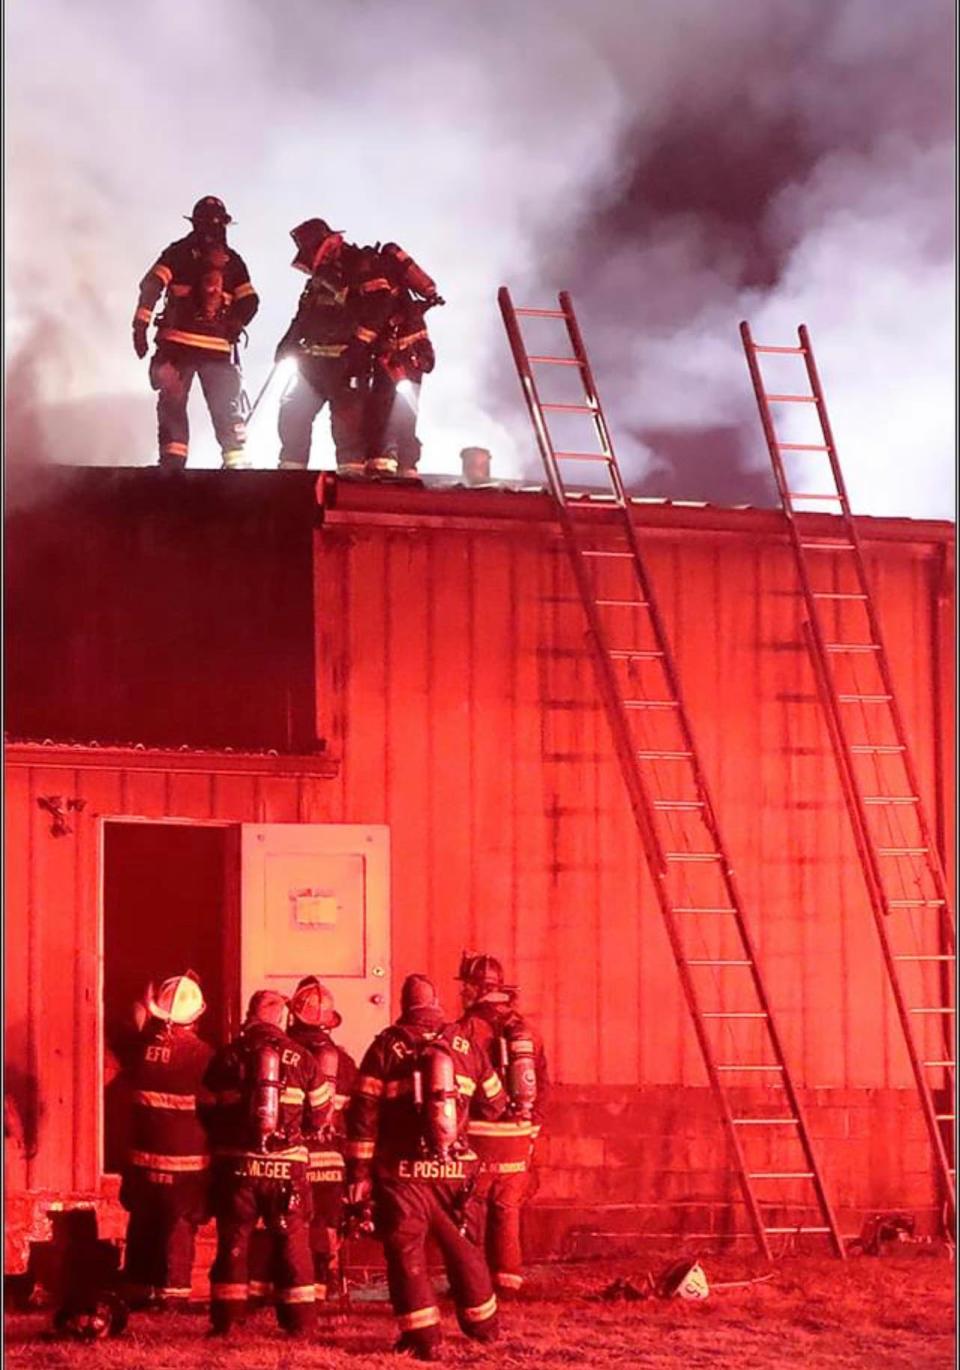 Fire crews work to put out a fire on the night of Dec. 26 at The Twisted Apple in Edneyville.